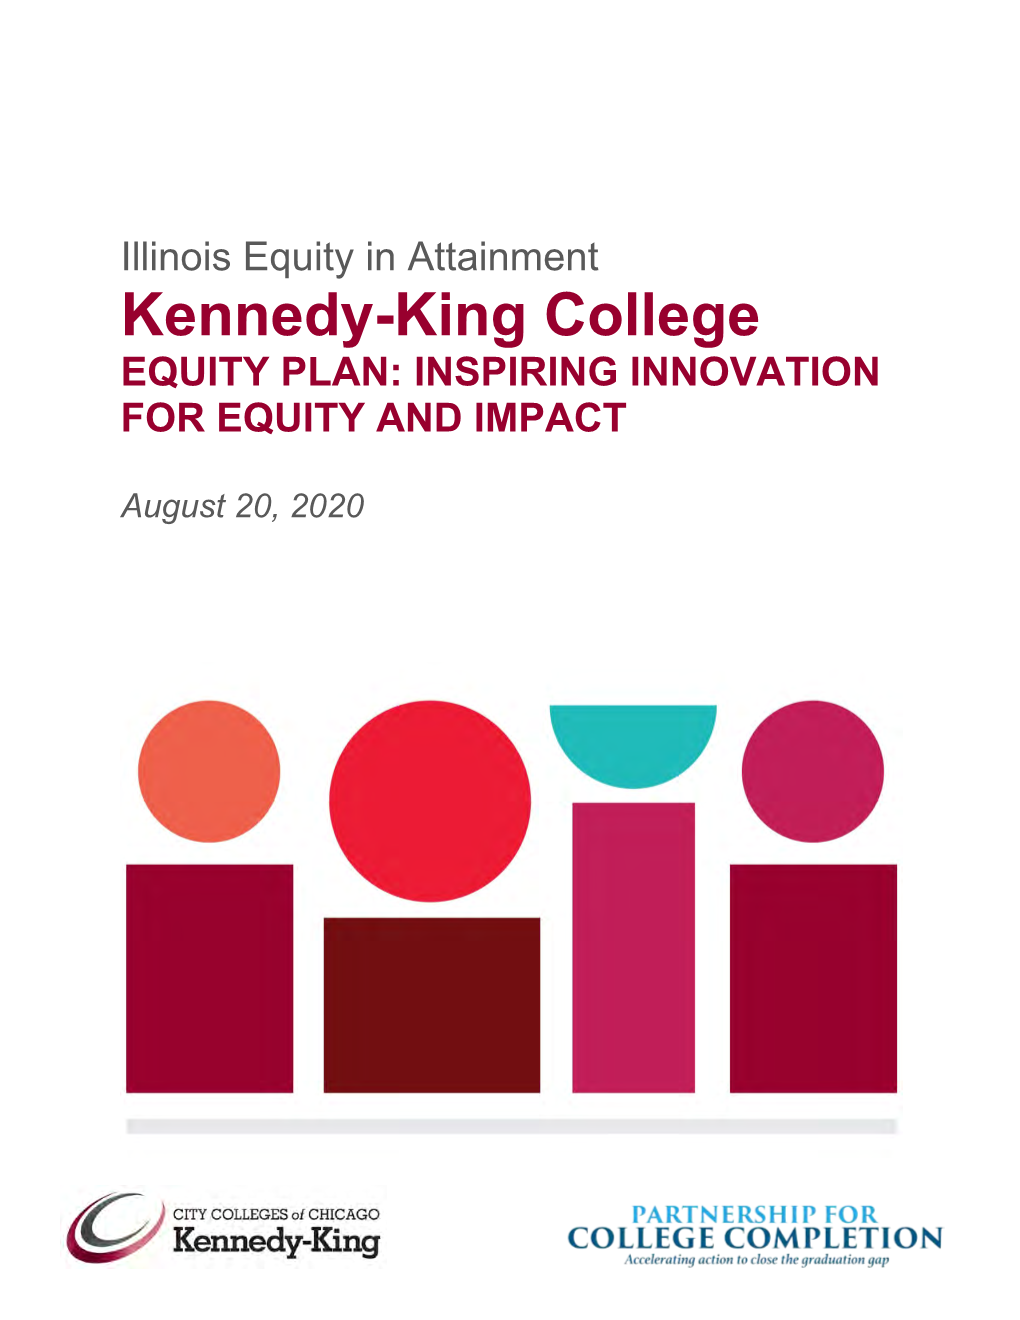 Kennedy-King College EQUITY PLAN: INSPIRING INNOVATION for EQUITY and IMPACT